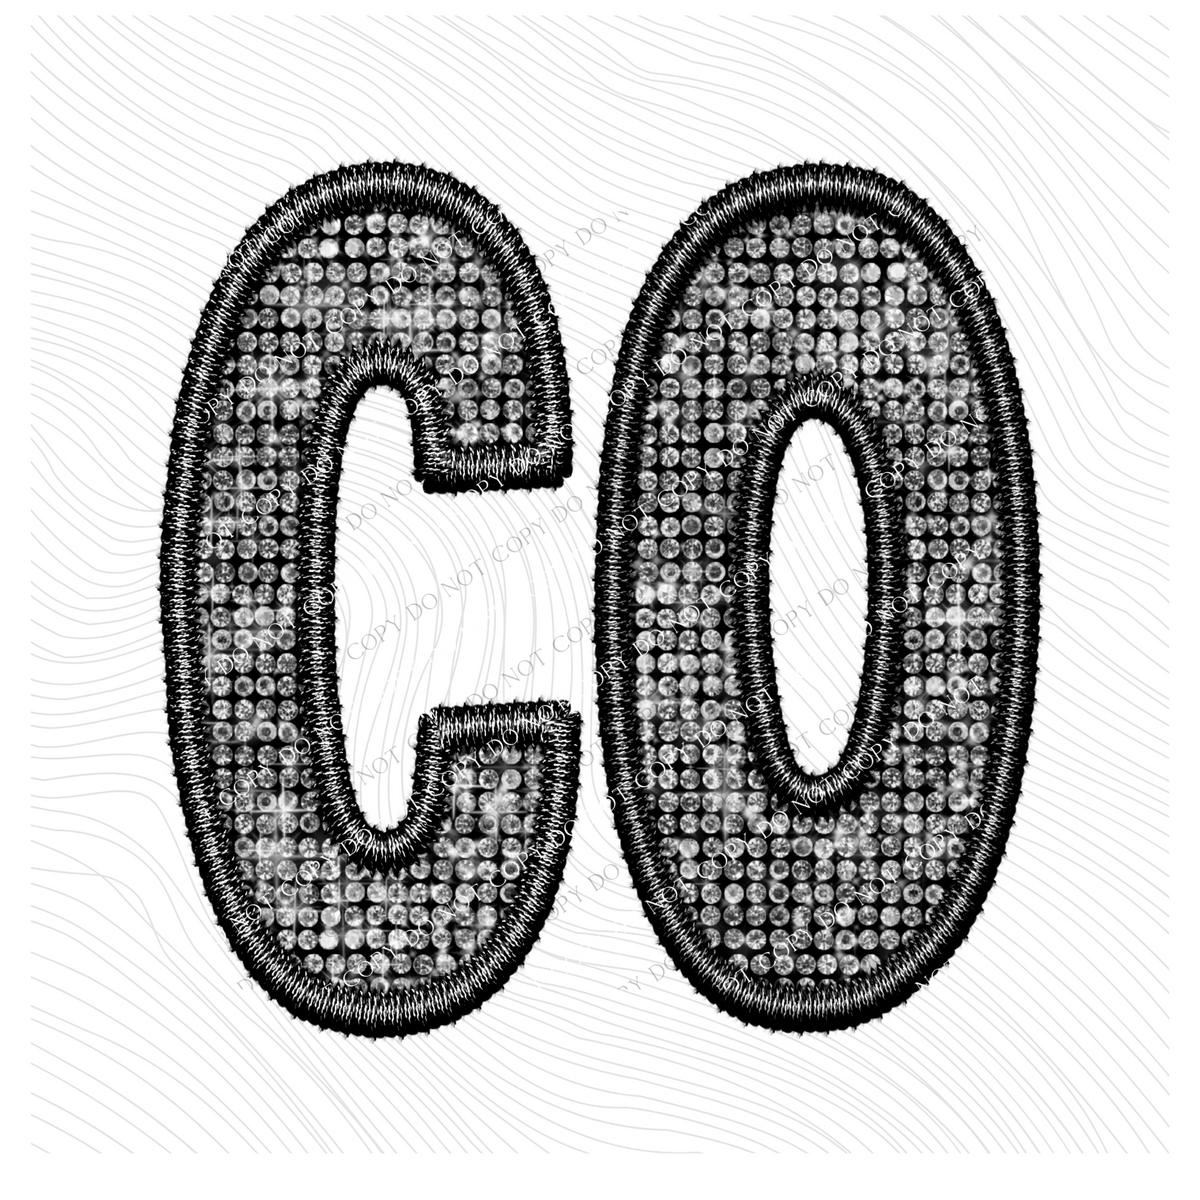 CO Colorado Faux Embroidery Diamonds Bling in Black Digital Design, PNG